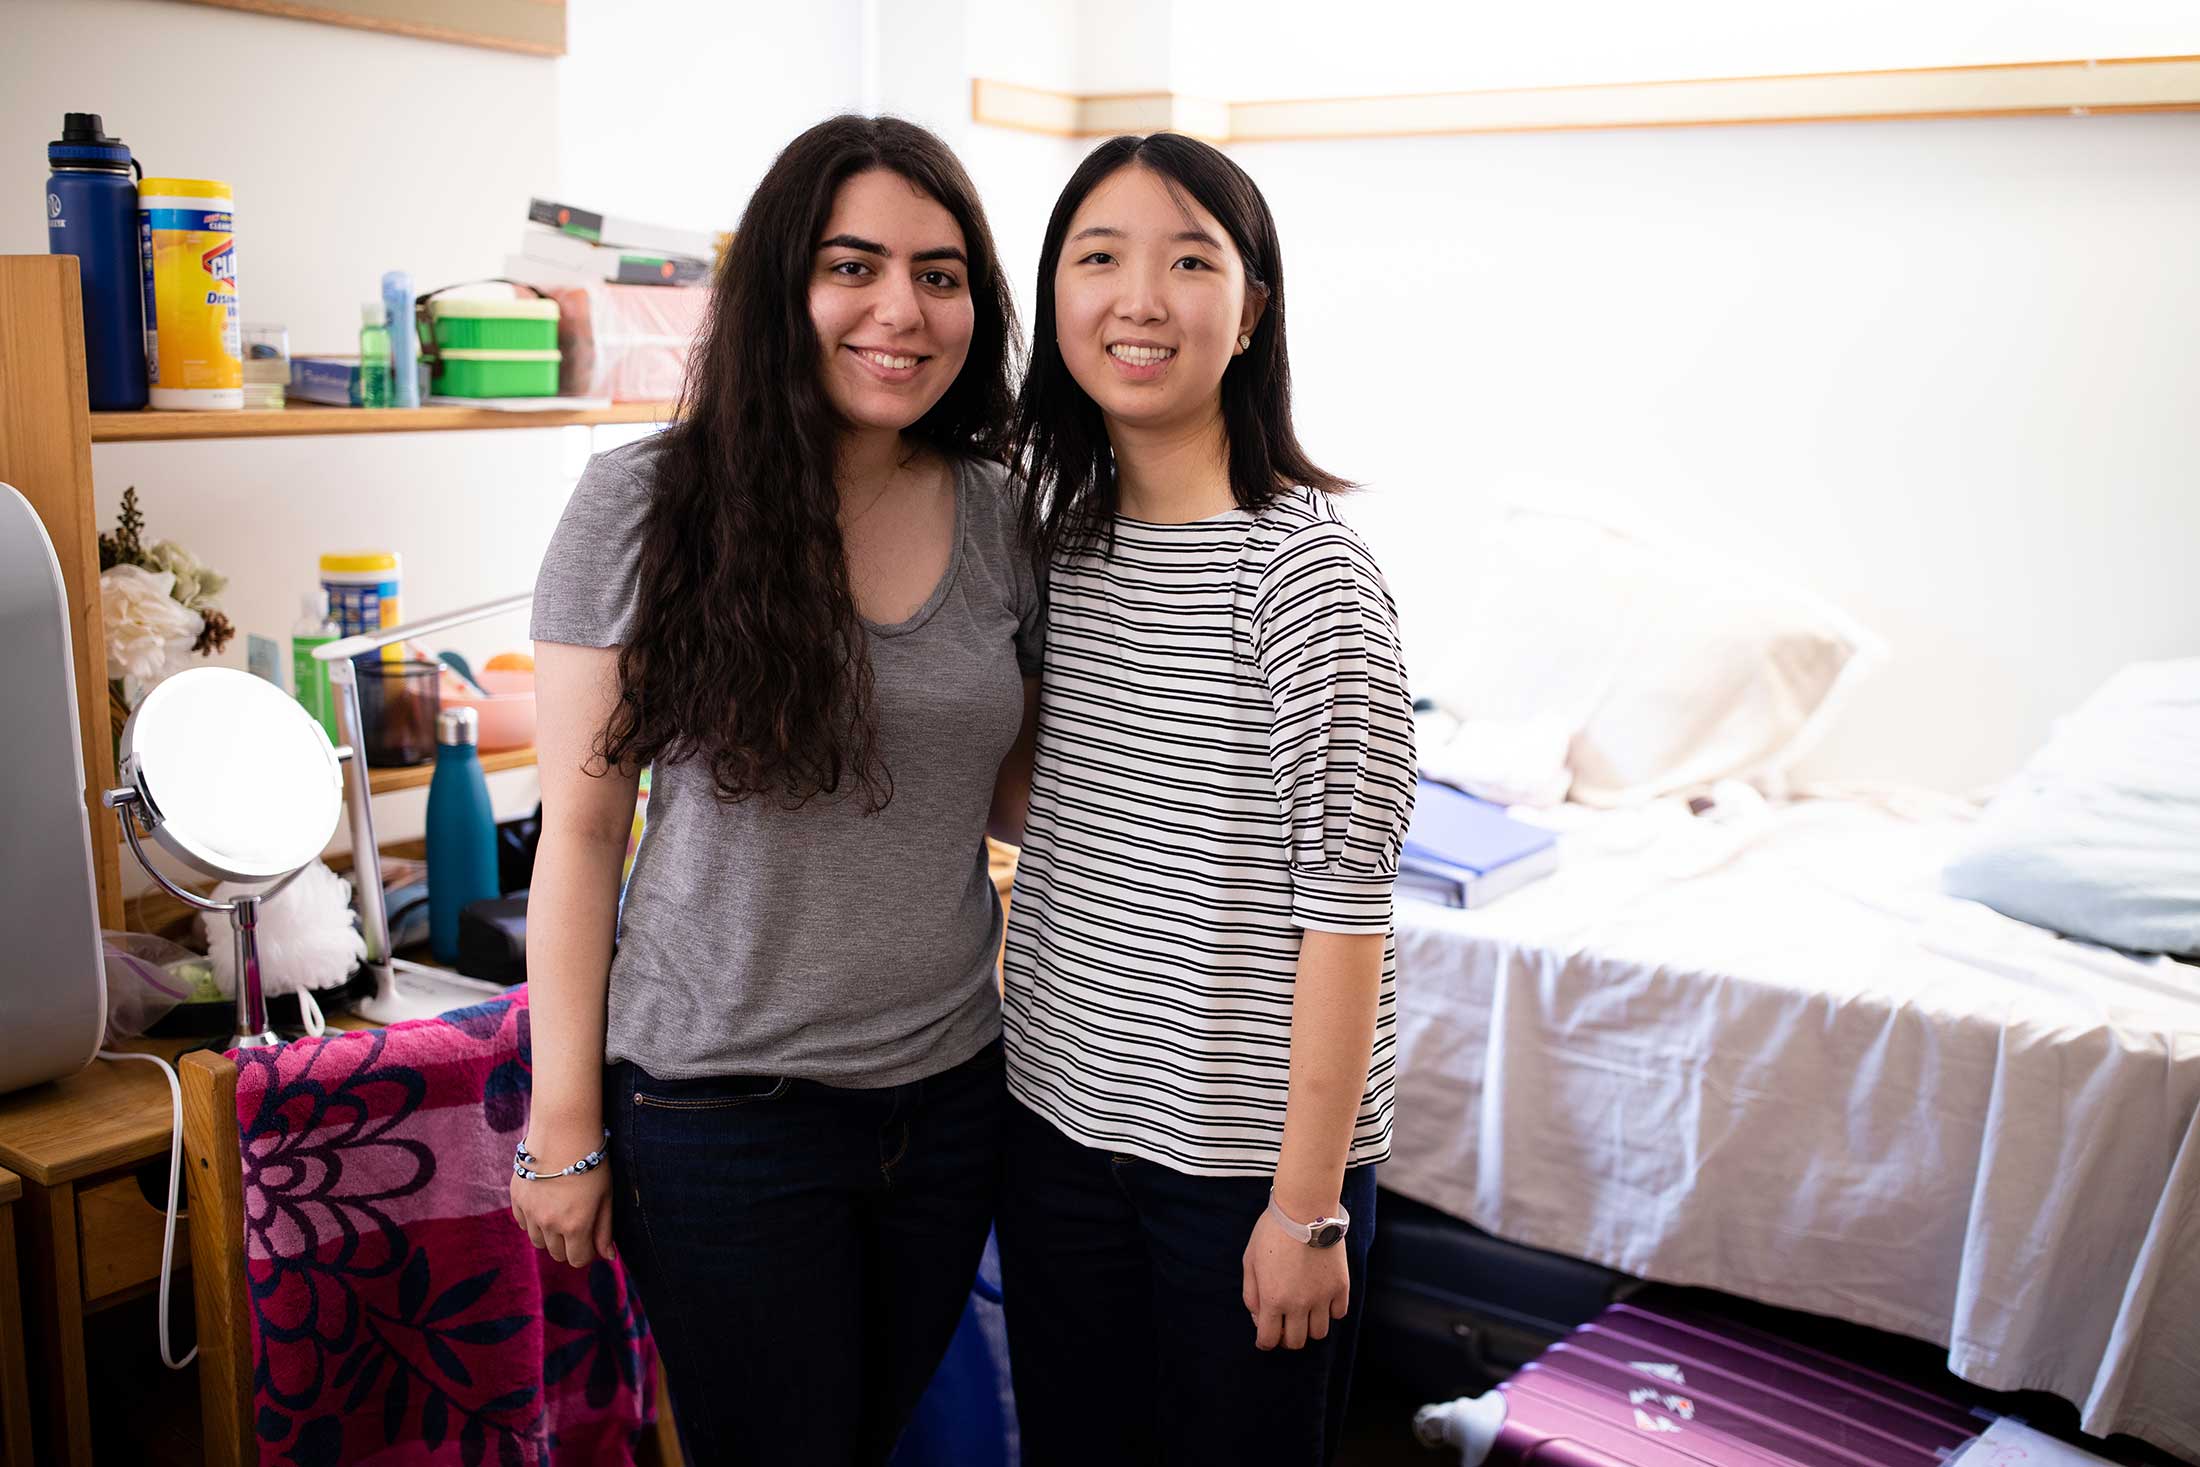 Two new roommates pose for a photo in their shared room